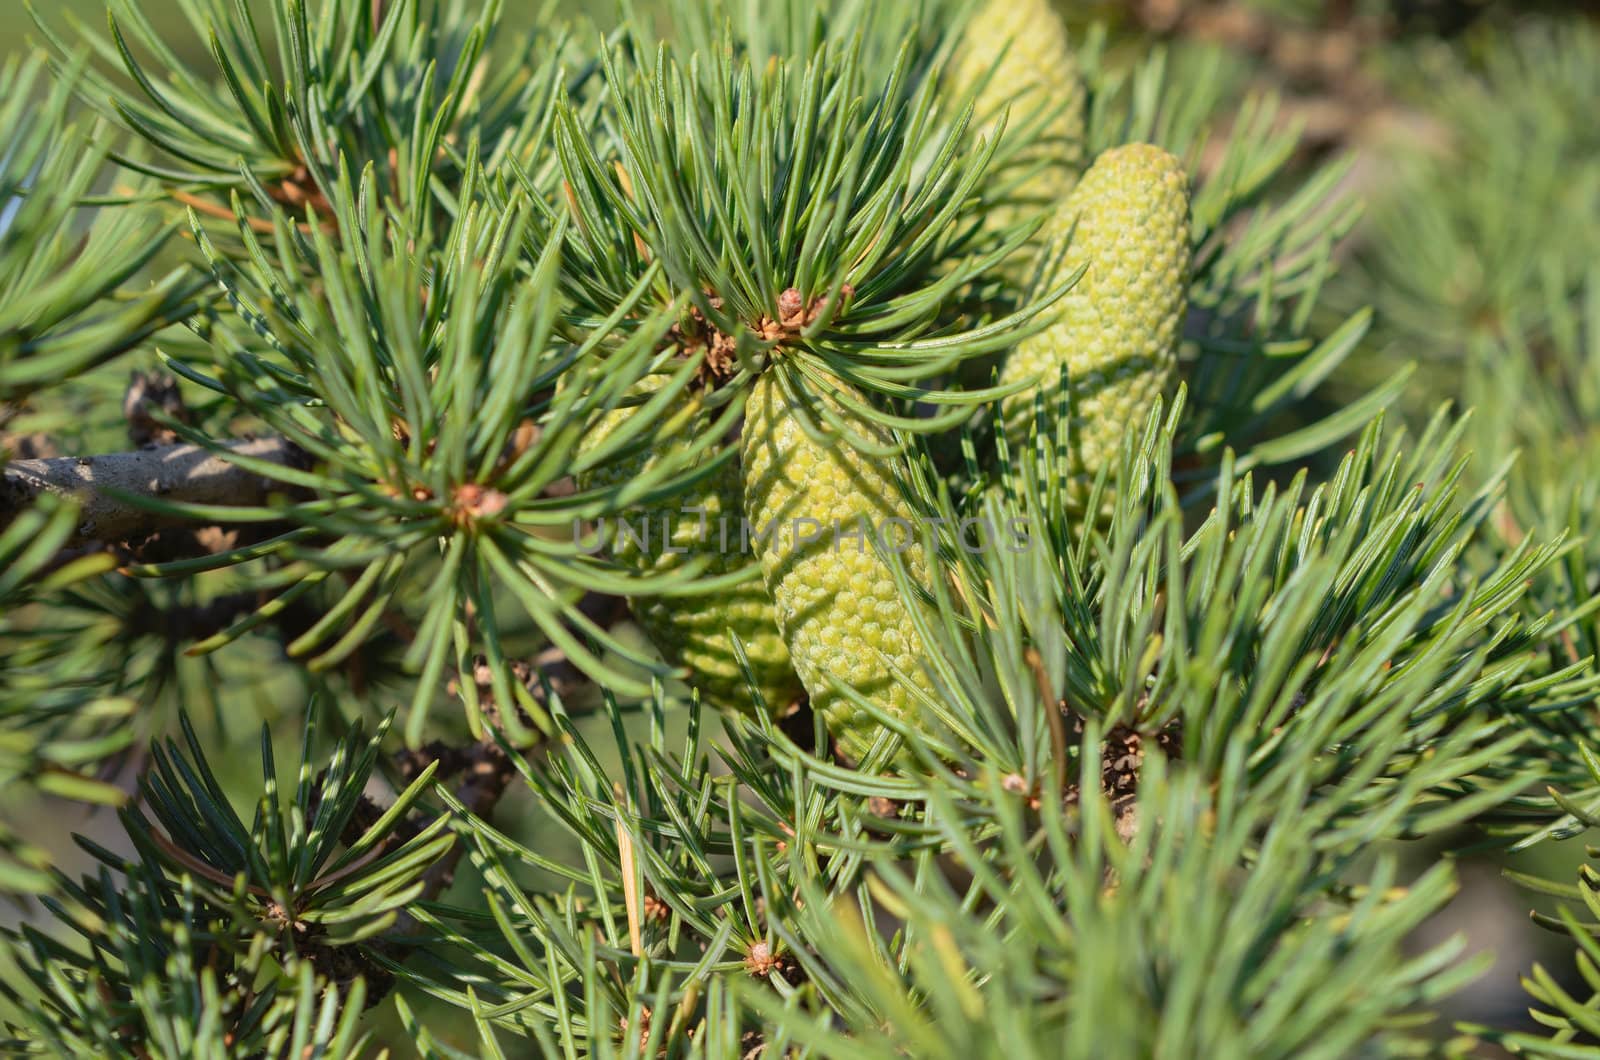 Branch of a pine with  small cones